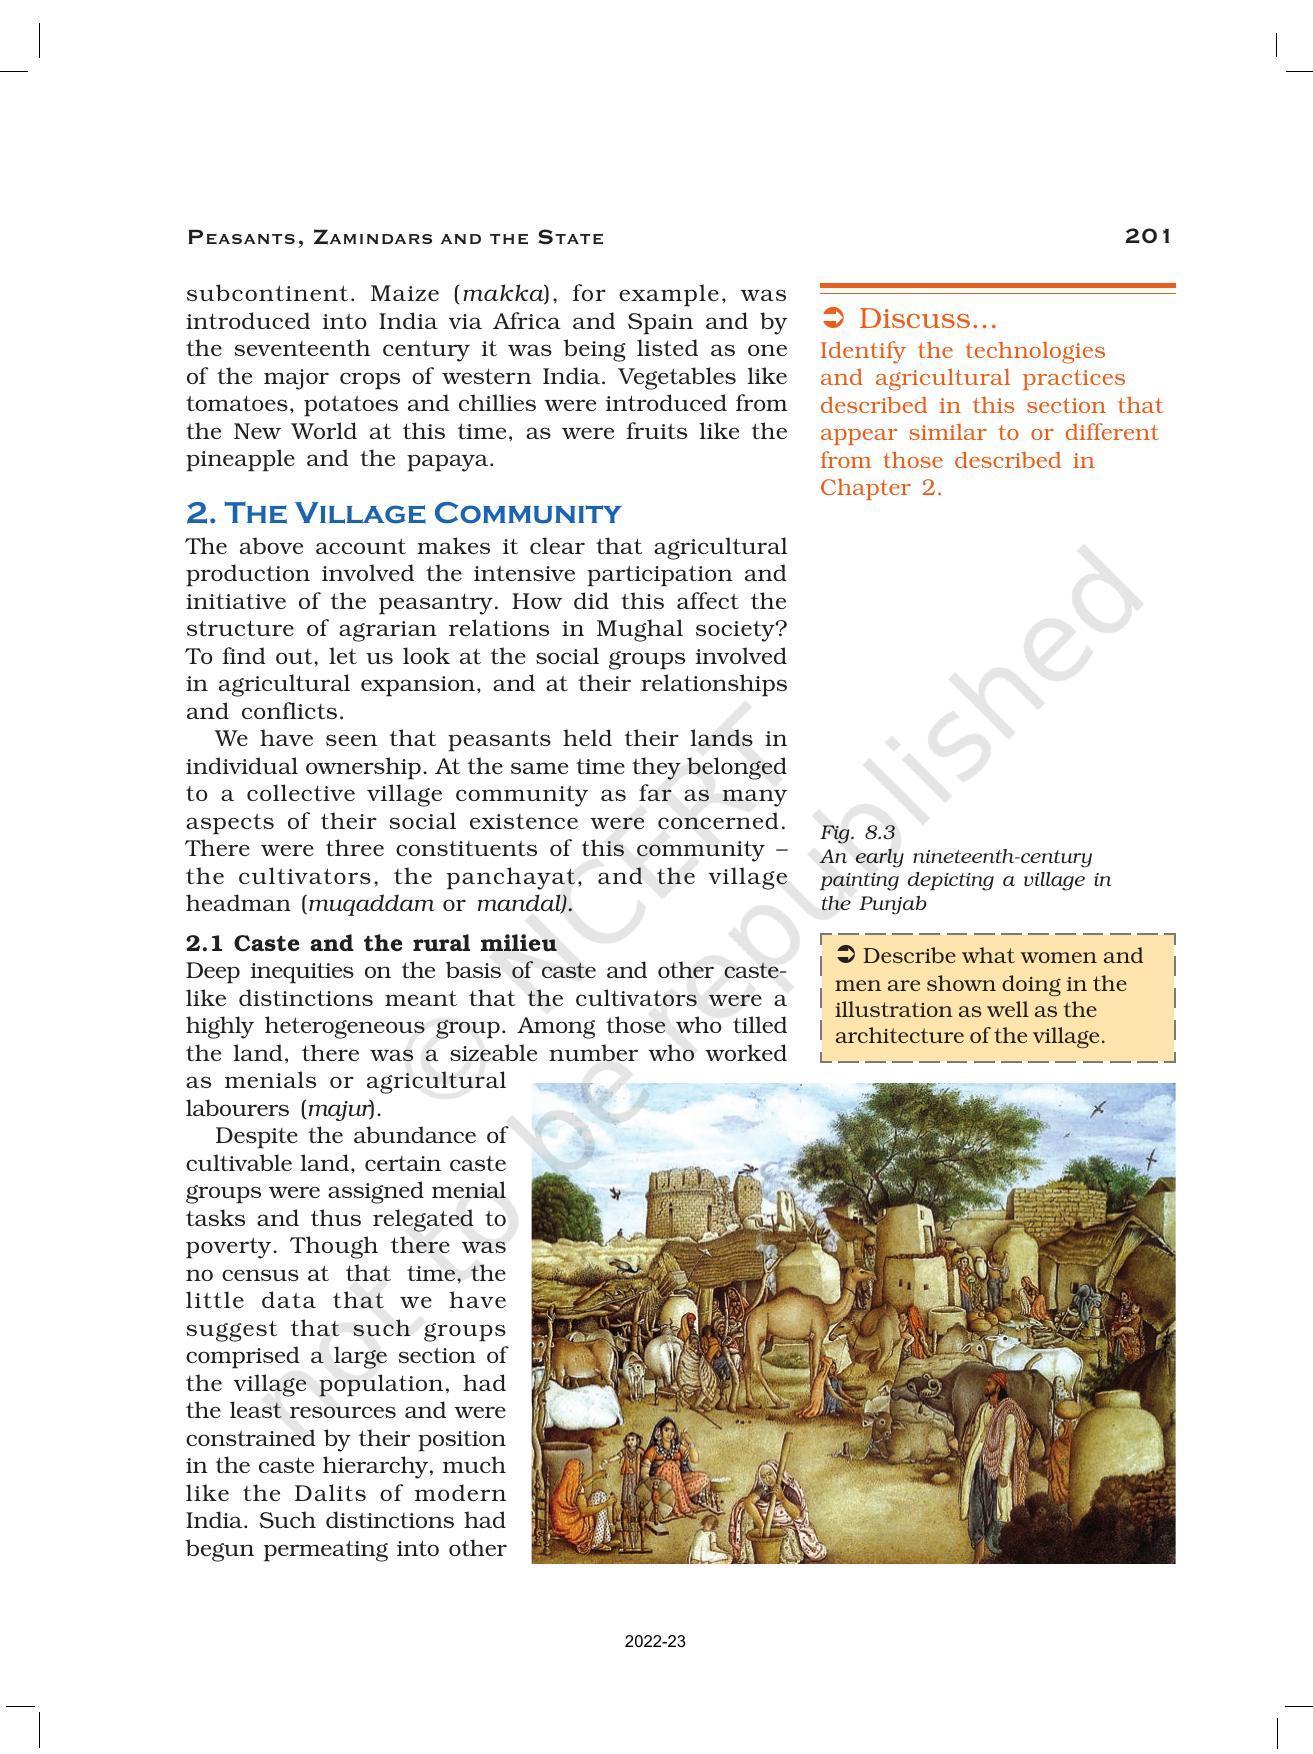 NCERT Book for Class 12 History (Part-II) Chapter 8 Peasants, Zamindars, and the State - Page 6